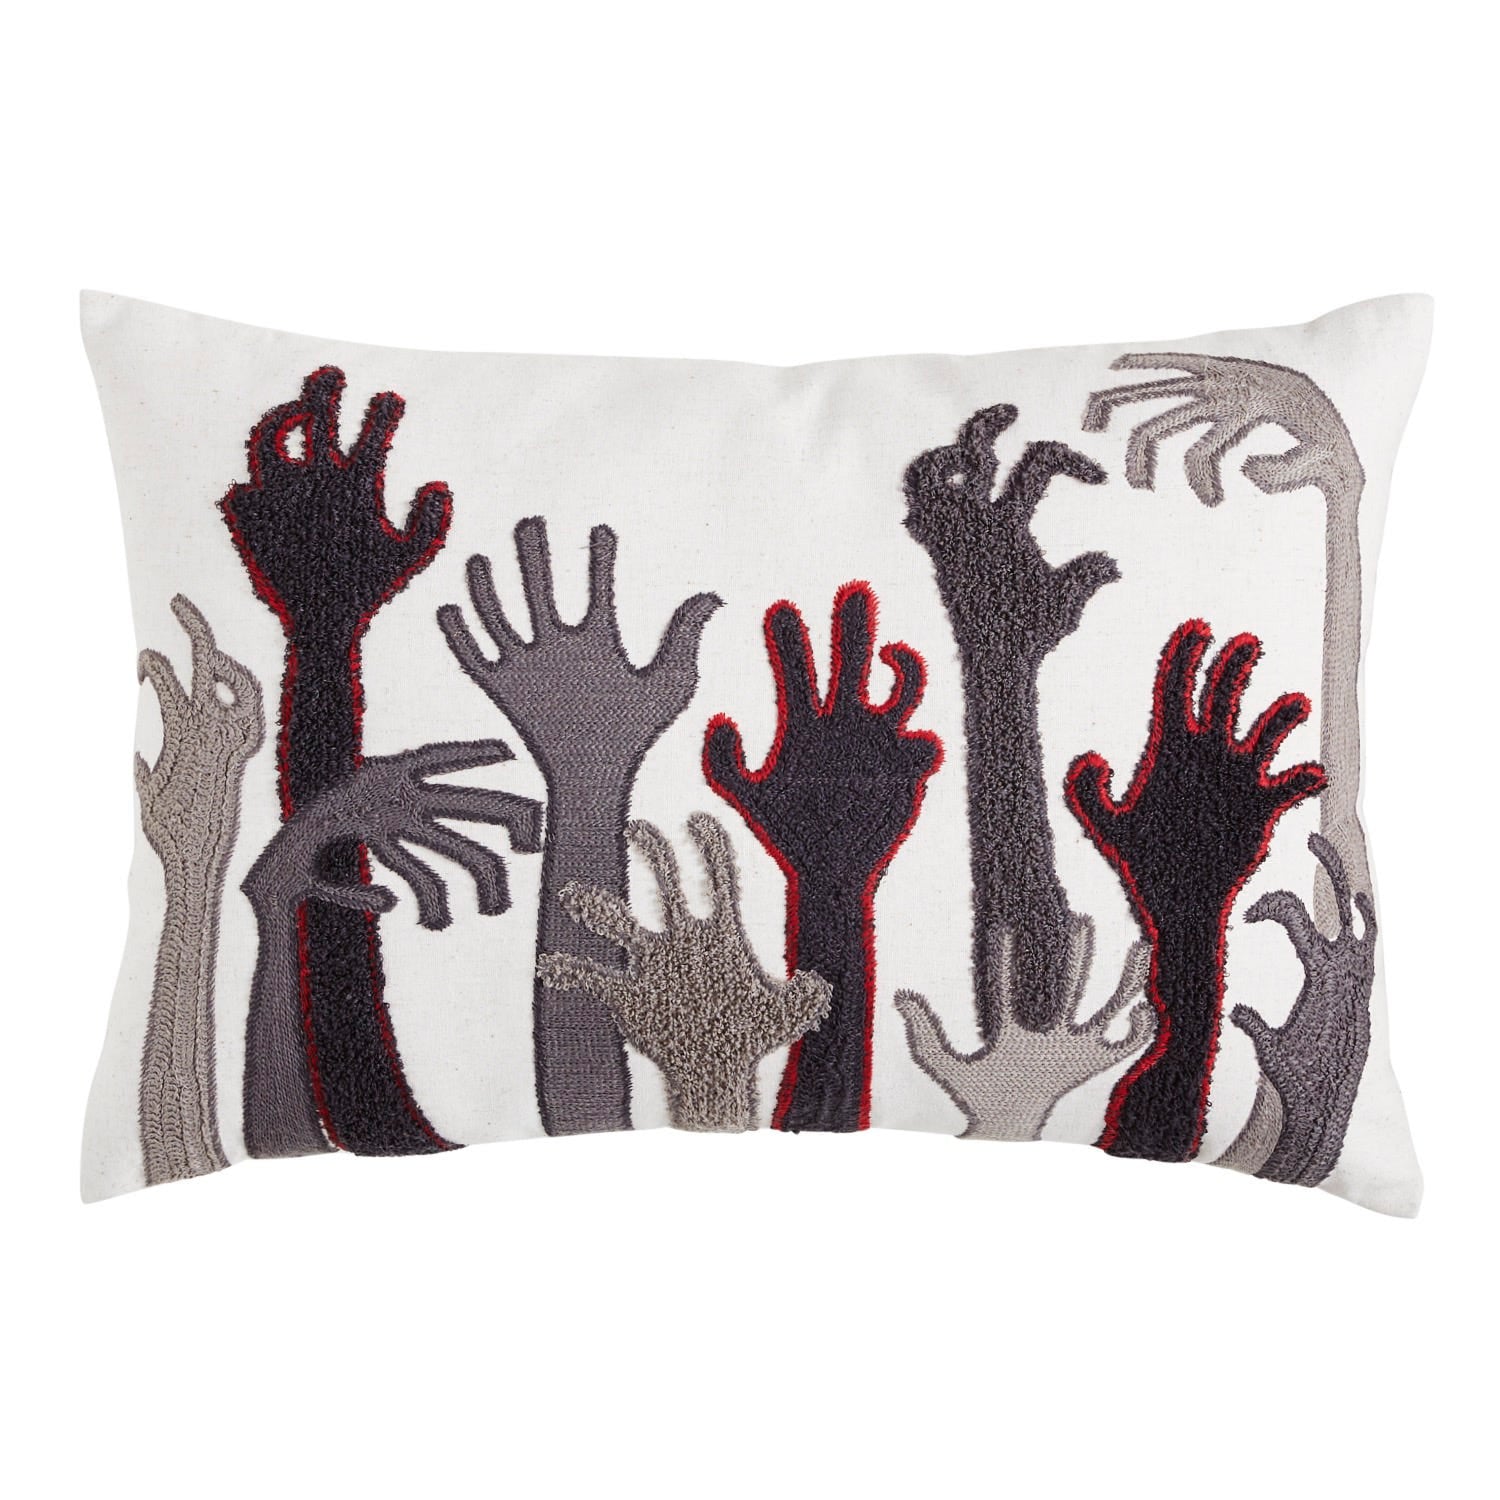 Pier 1  20 x 14 ZOMBIE HANDS Decorative Embroidery Throw Pillow BN Sold Out 